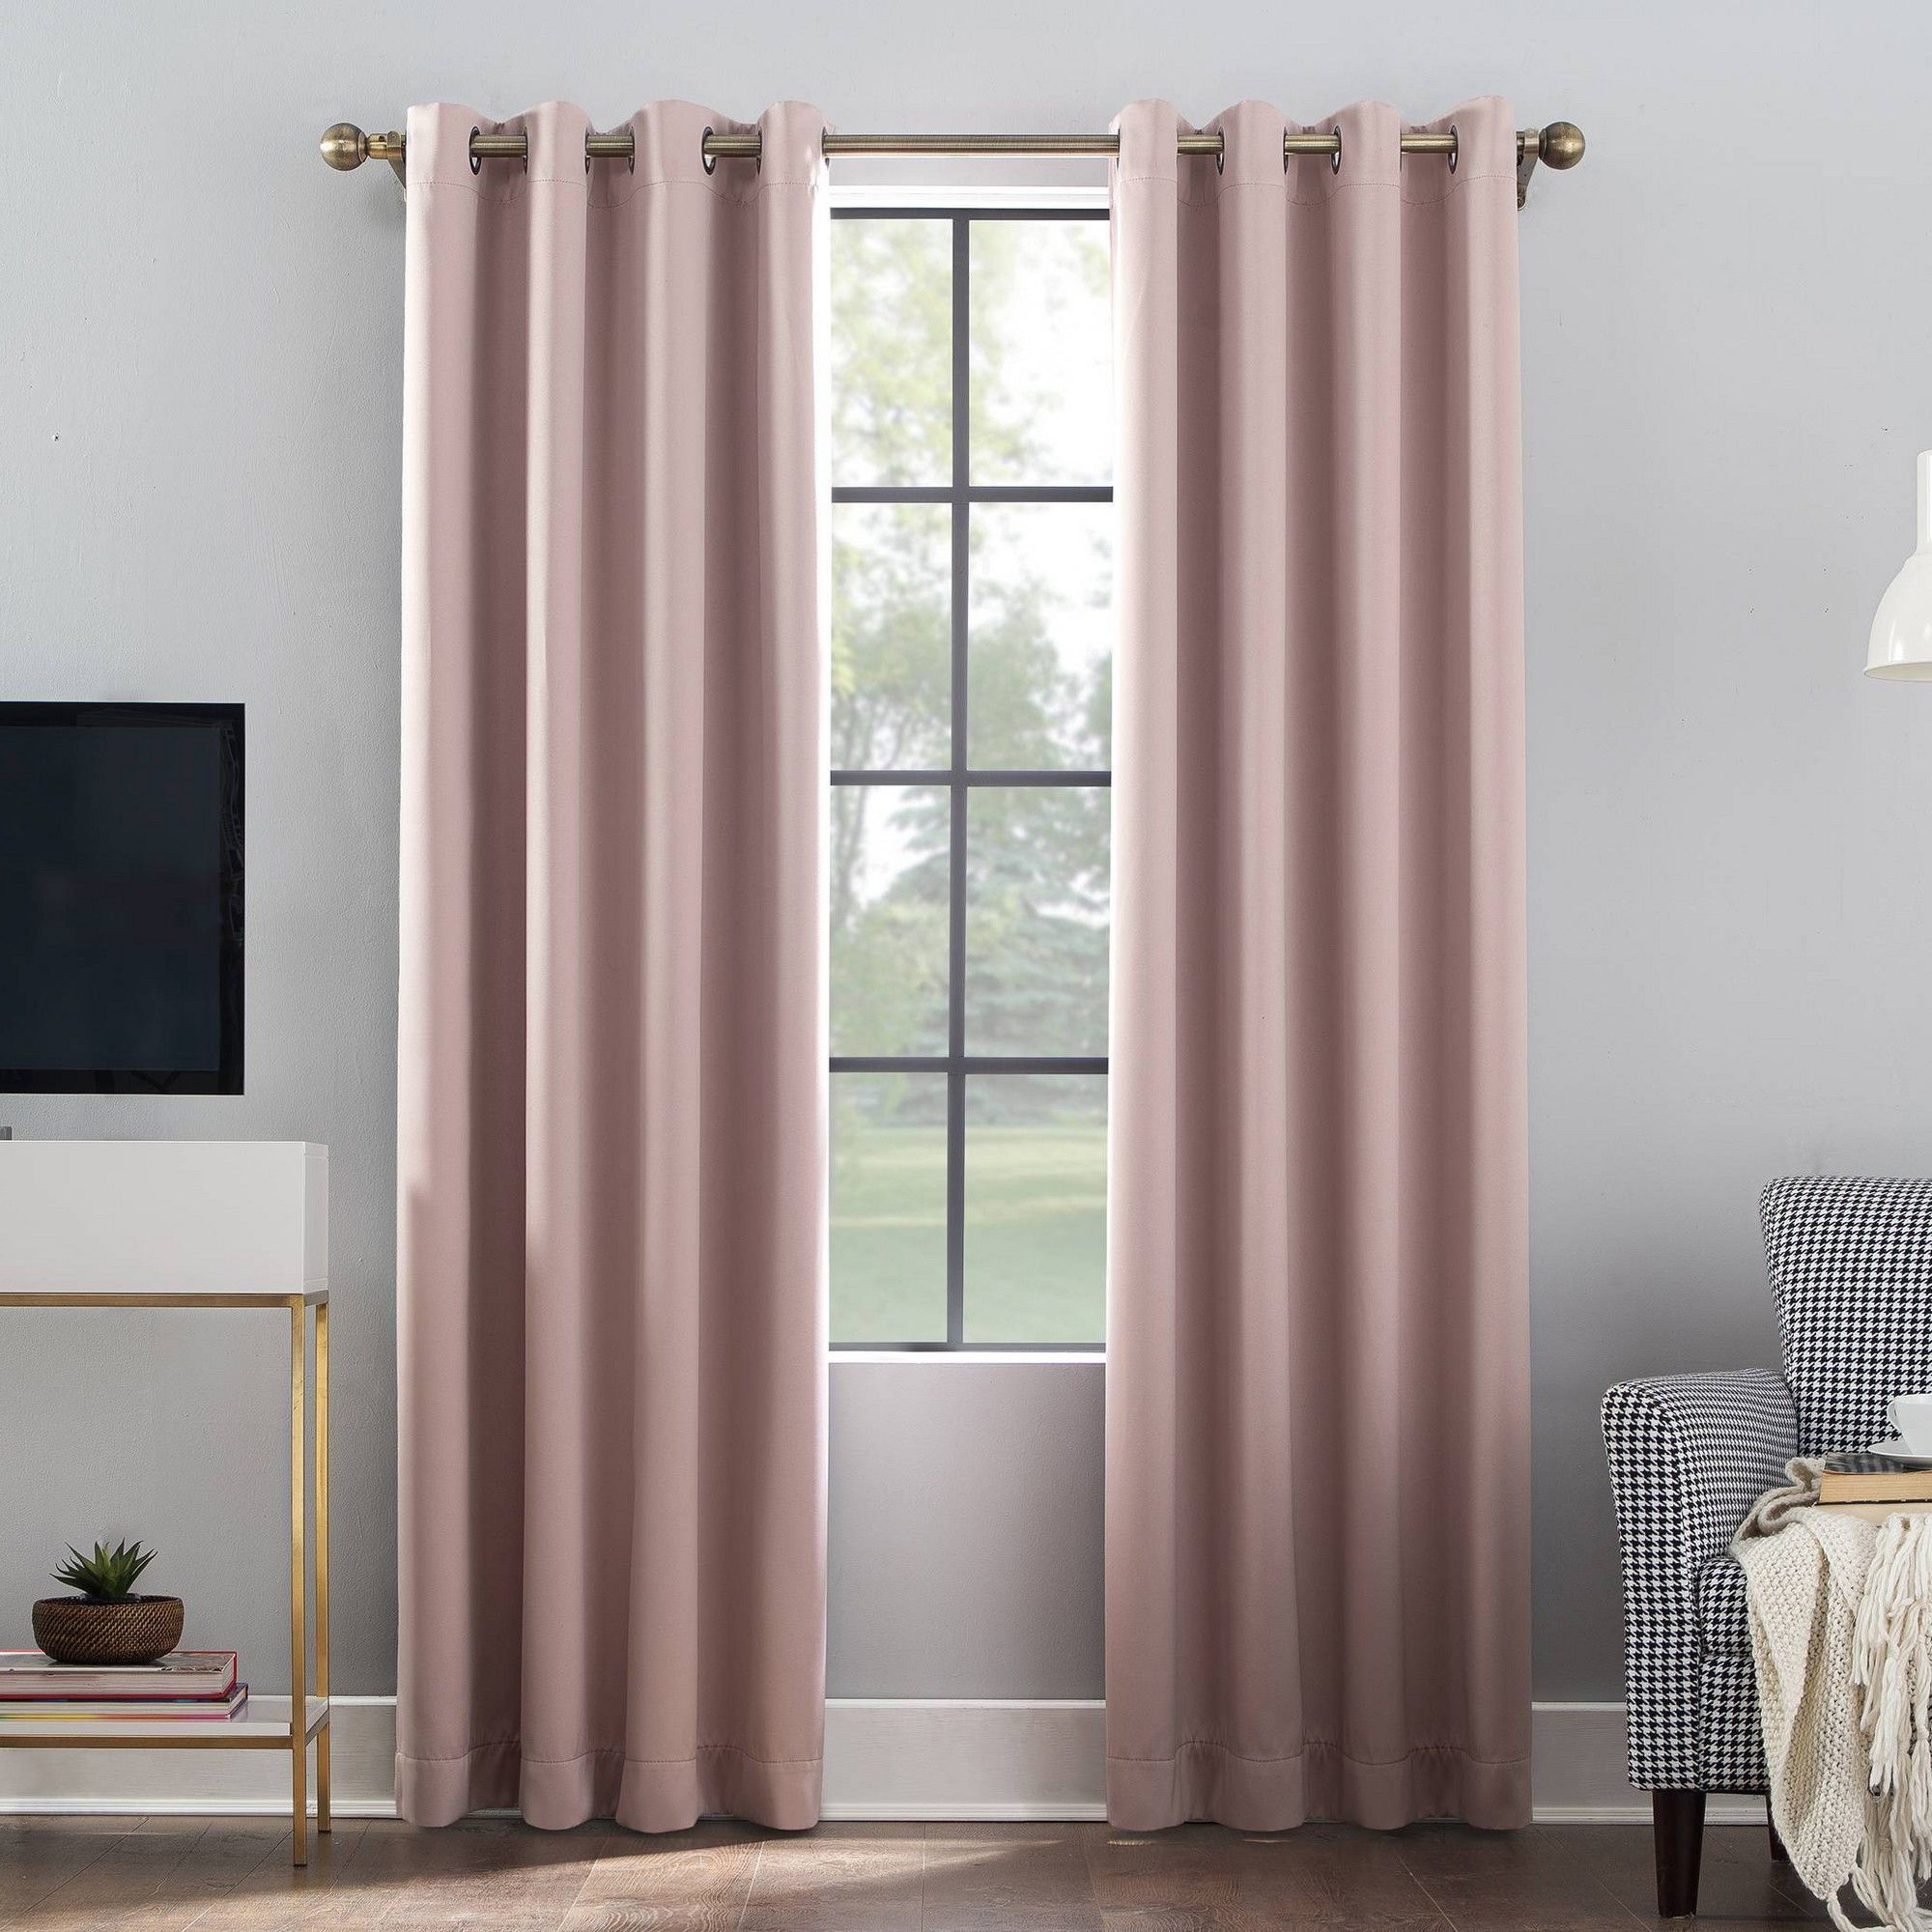 Famous 52"x95" Oslo Grommet Top Blackout Window Curtain Panel Blush In Riley Kids Bedroom Blackout Grommet Curtain Panels (View 18 of 20)